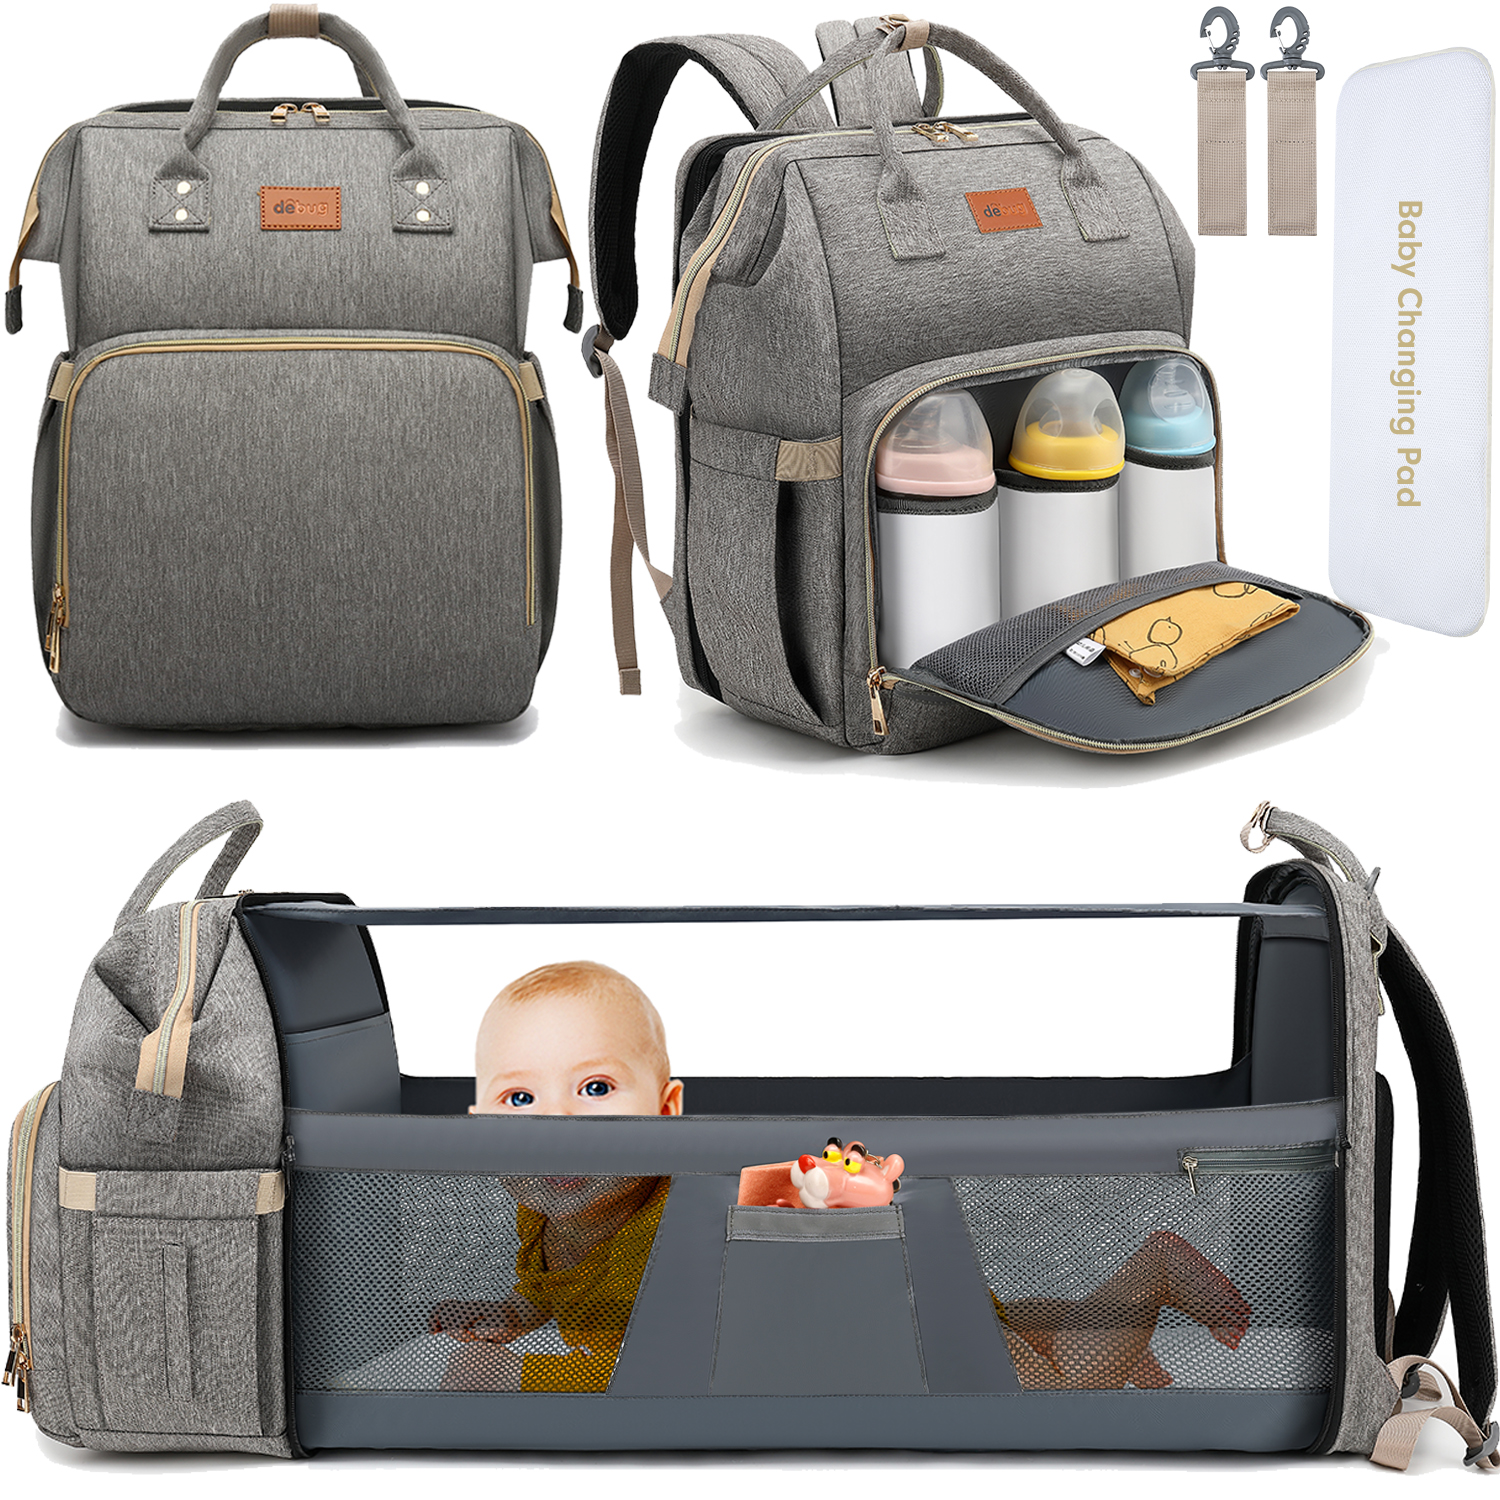 Baby Diaper Bag Backpack With Changing Station - Dual-use Baby Bag